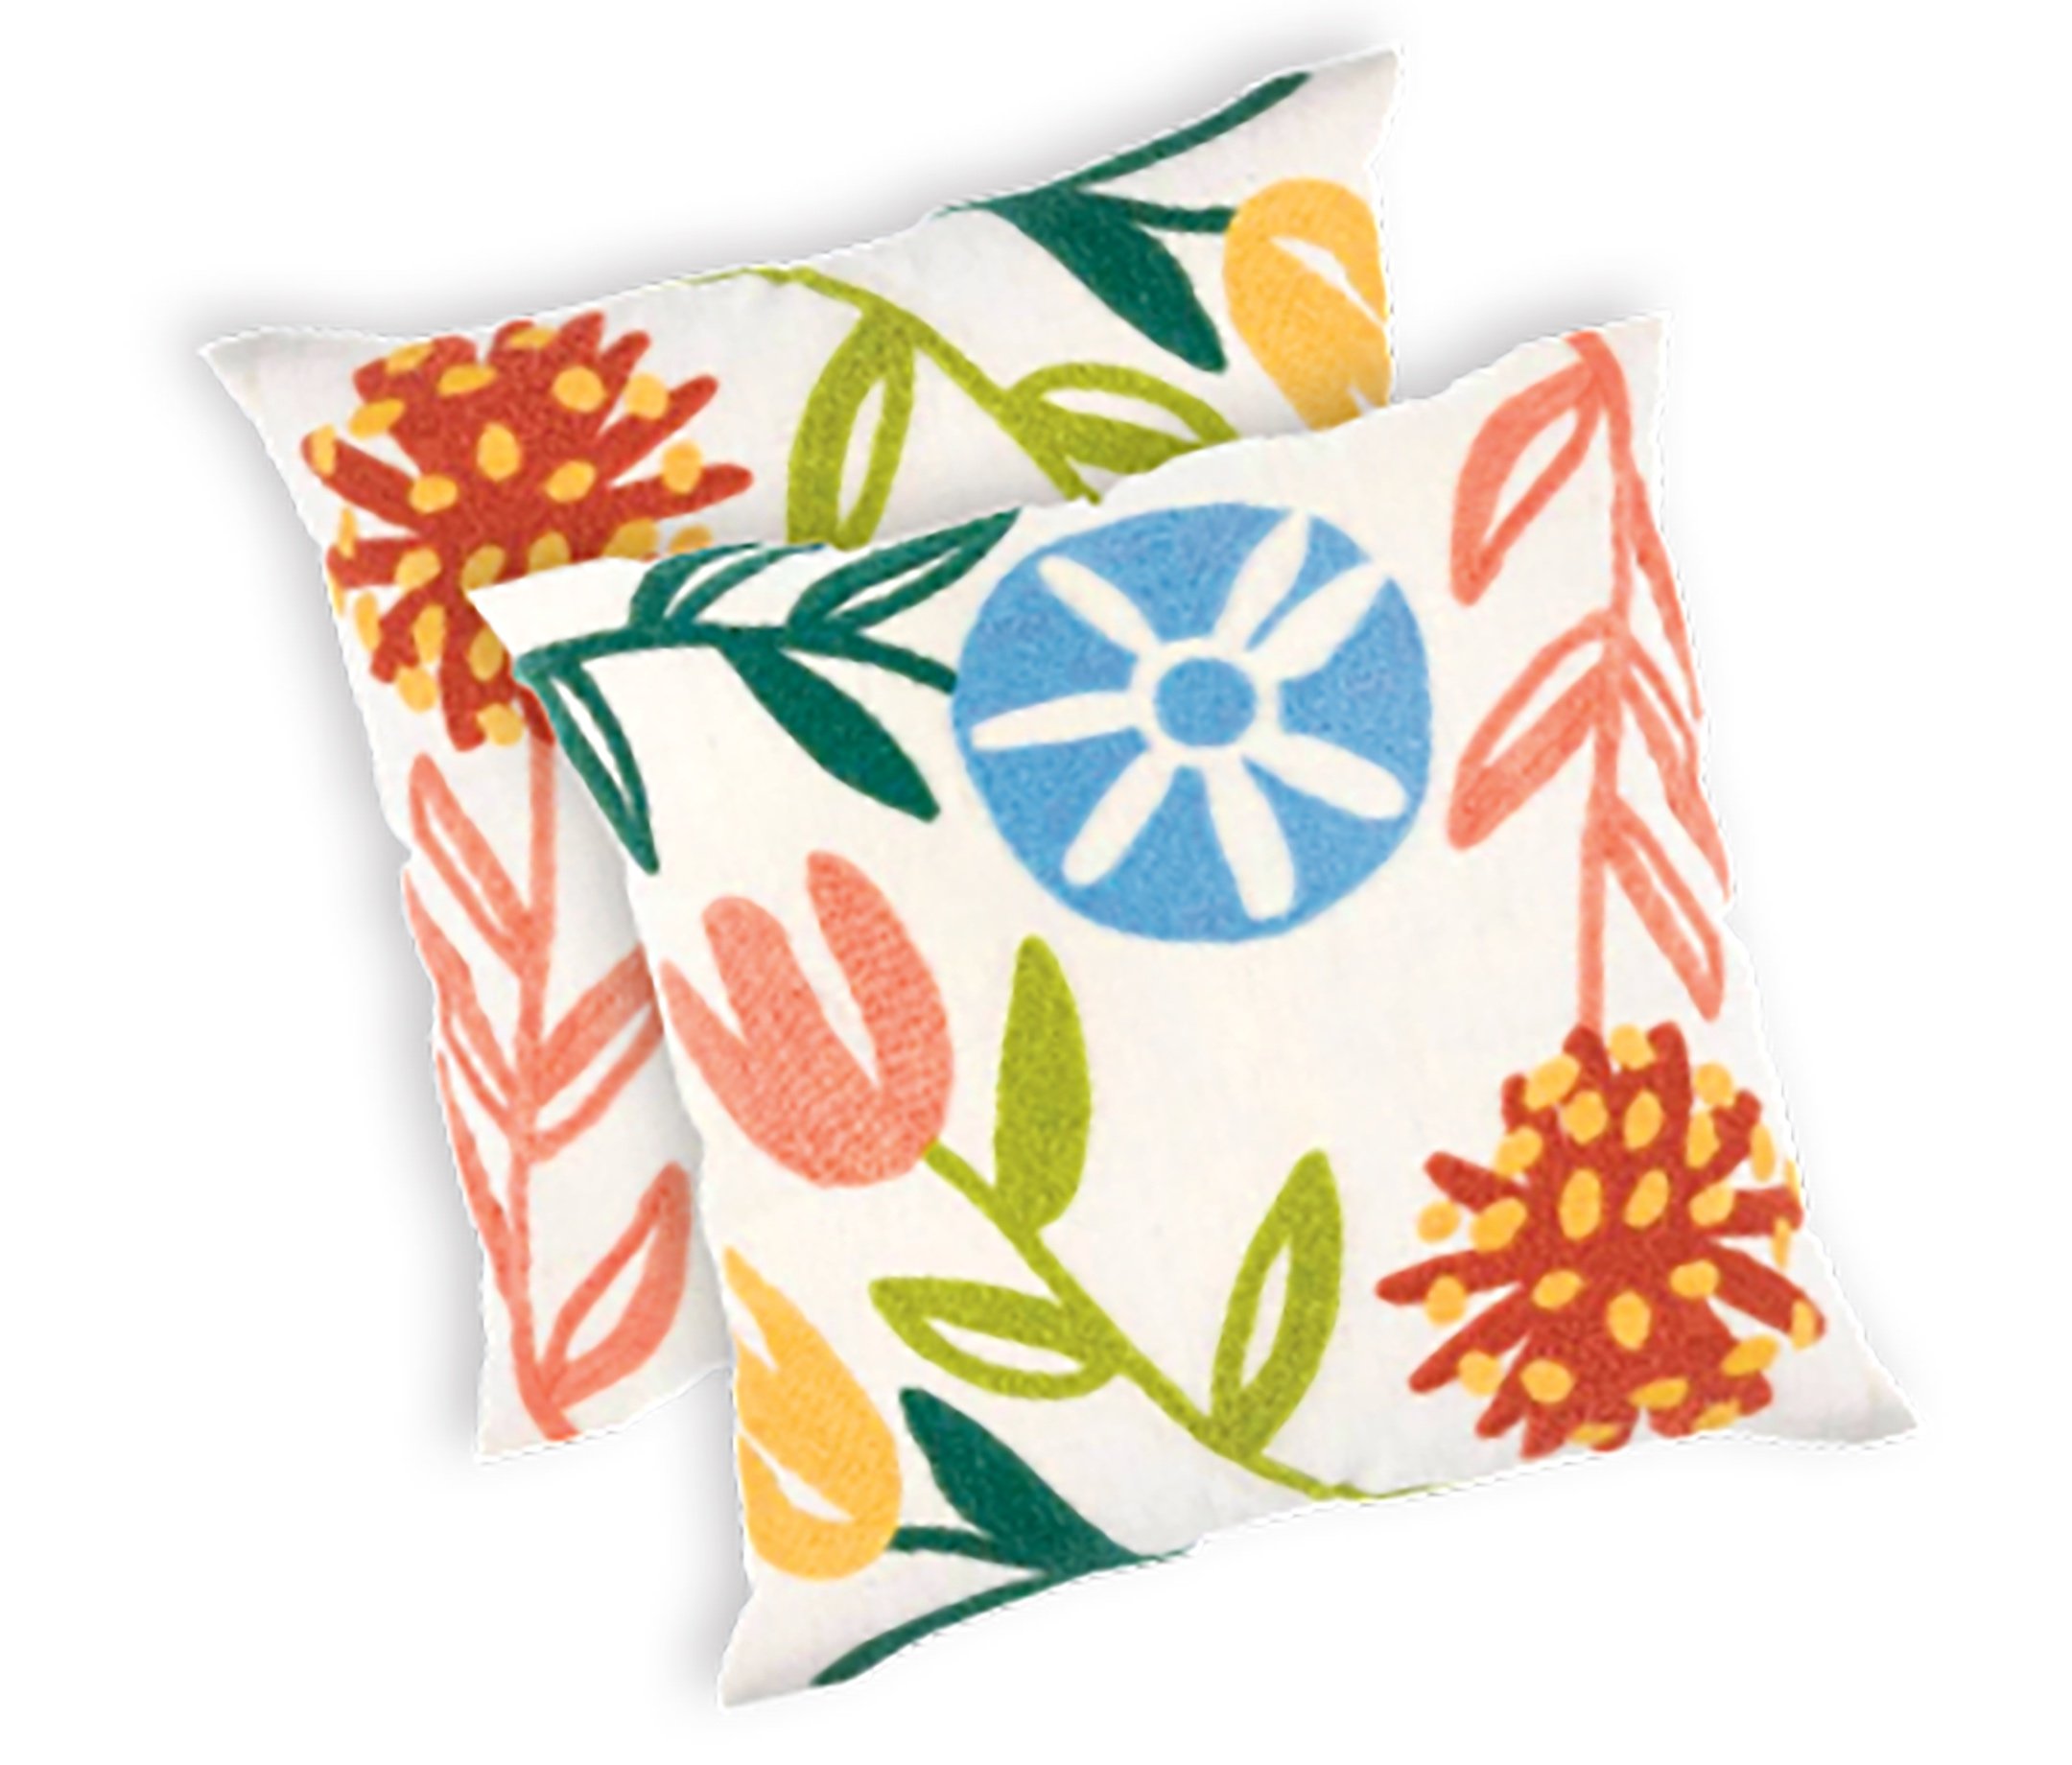  Brighten up your room with this chic hand-embroidered pillow featuring a charming floral pattern in cheerful hues.  www.idgcayman.com  